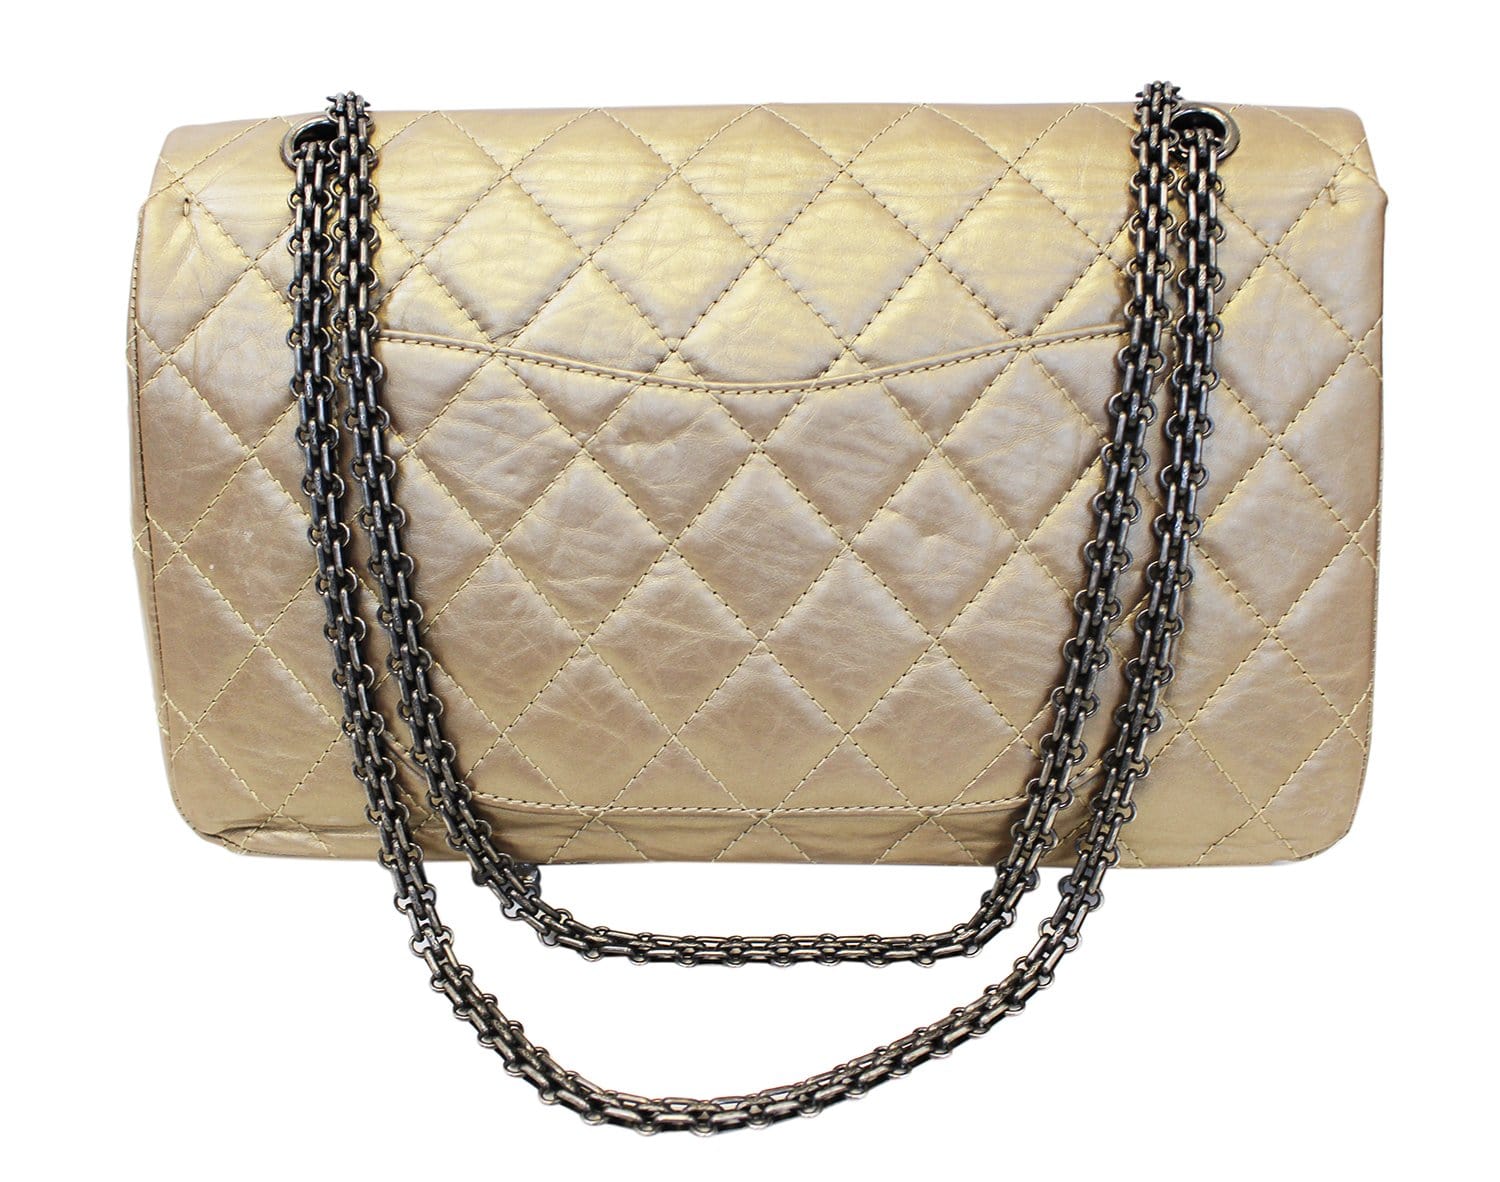 BRONZE CRINCKLED LEATHER AND BRONZE-TONE METAL 2.55 REISSUE SHOULDER BAG,  CHANEL, A Collection of a Lifetime: Chanel Online, Jewellery